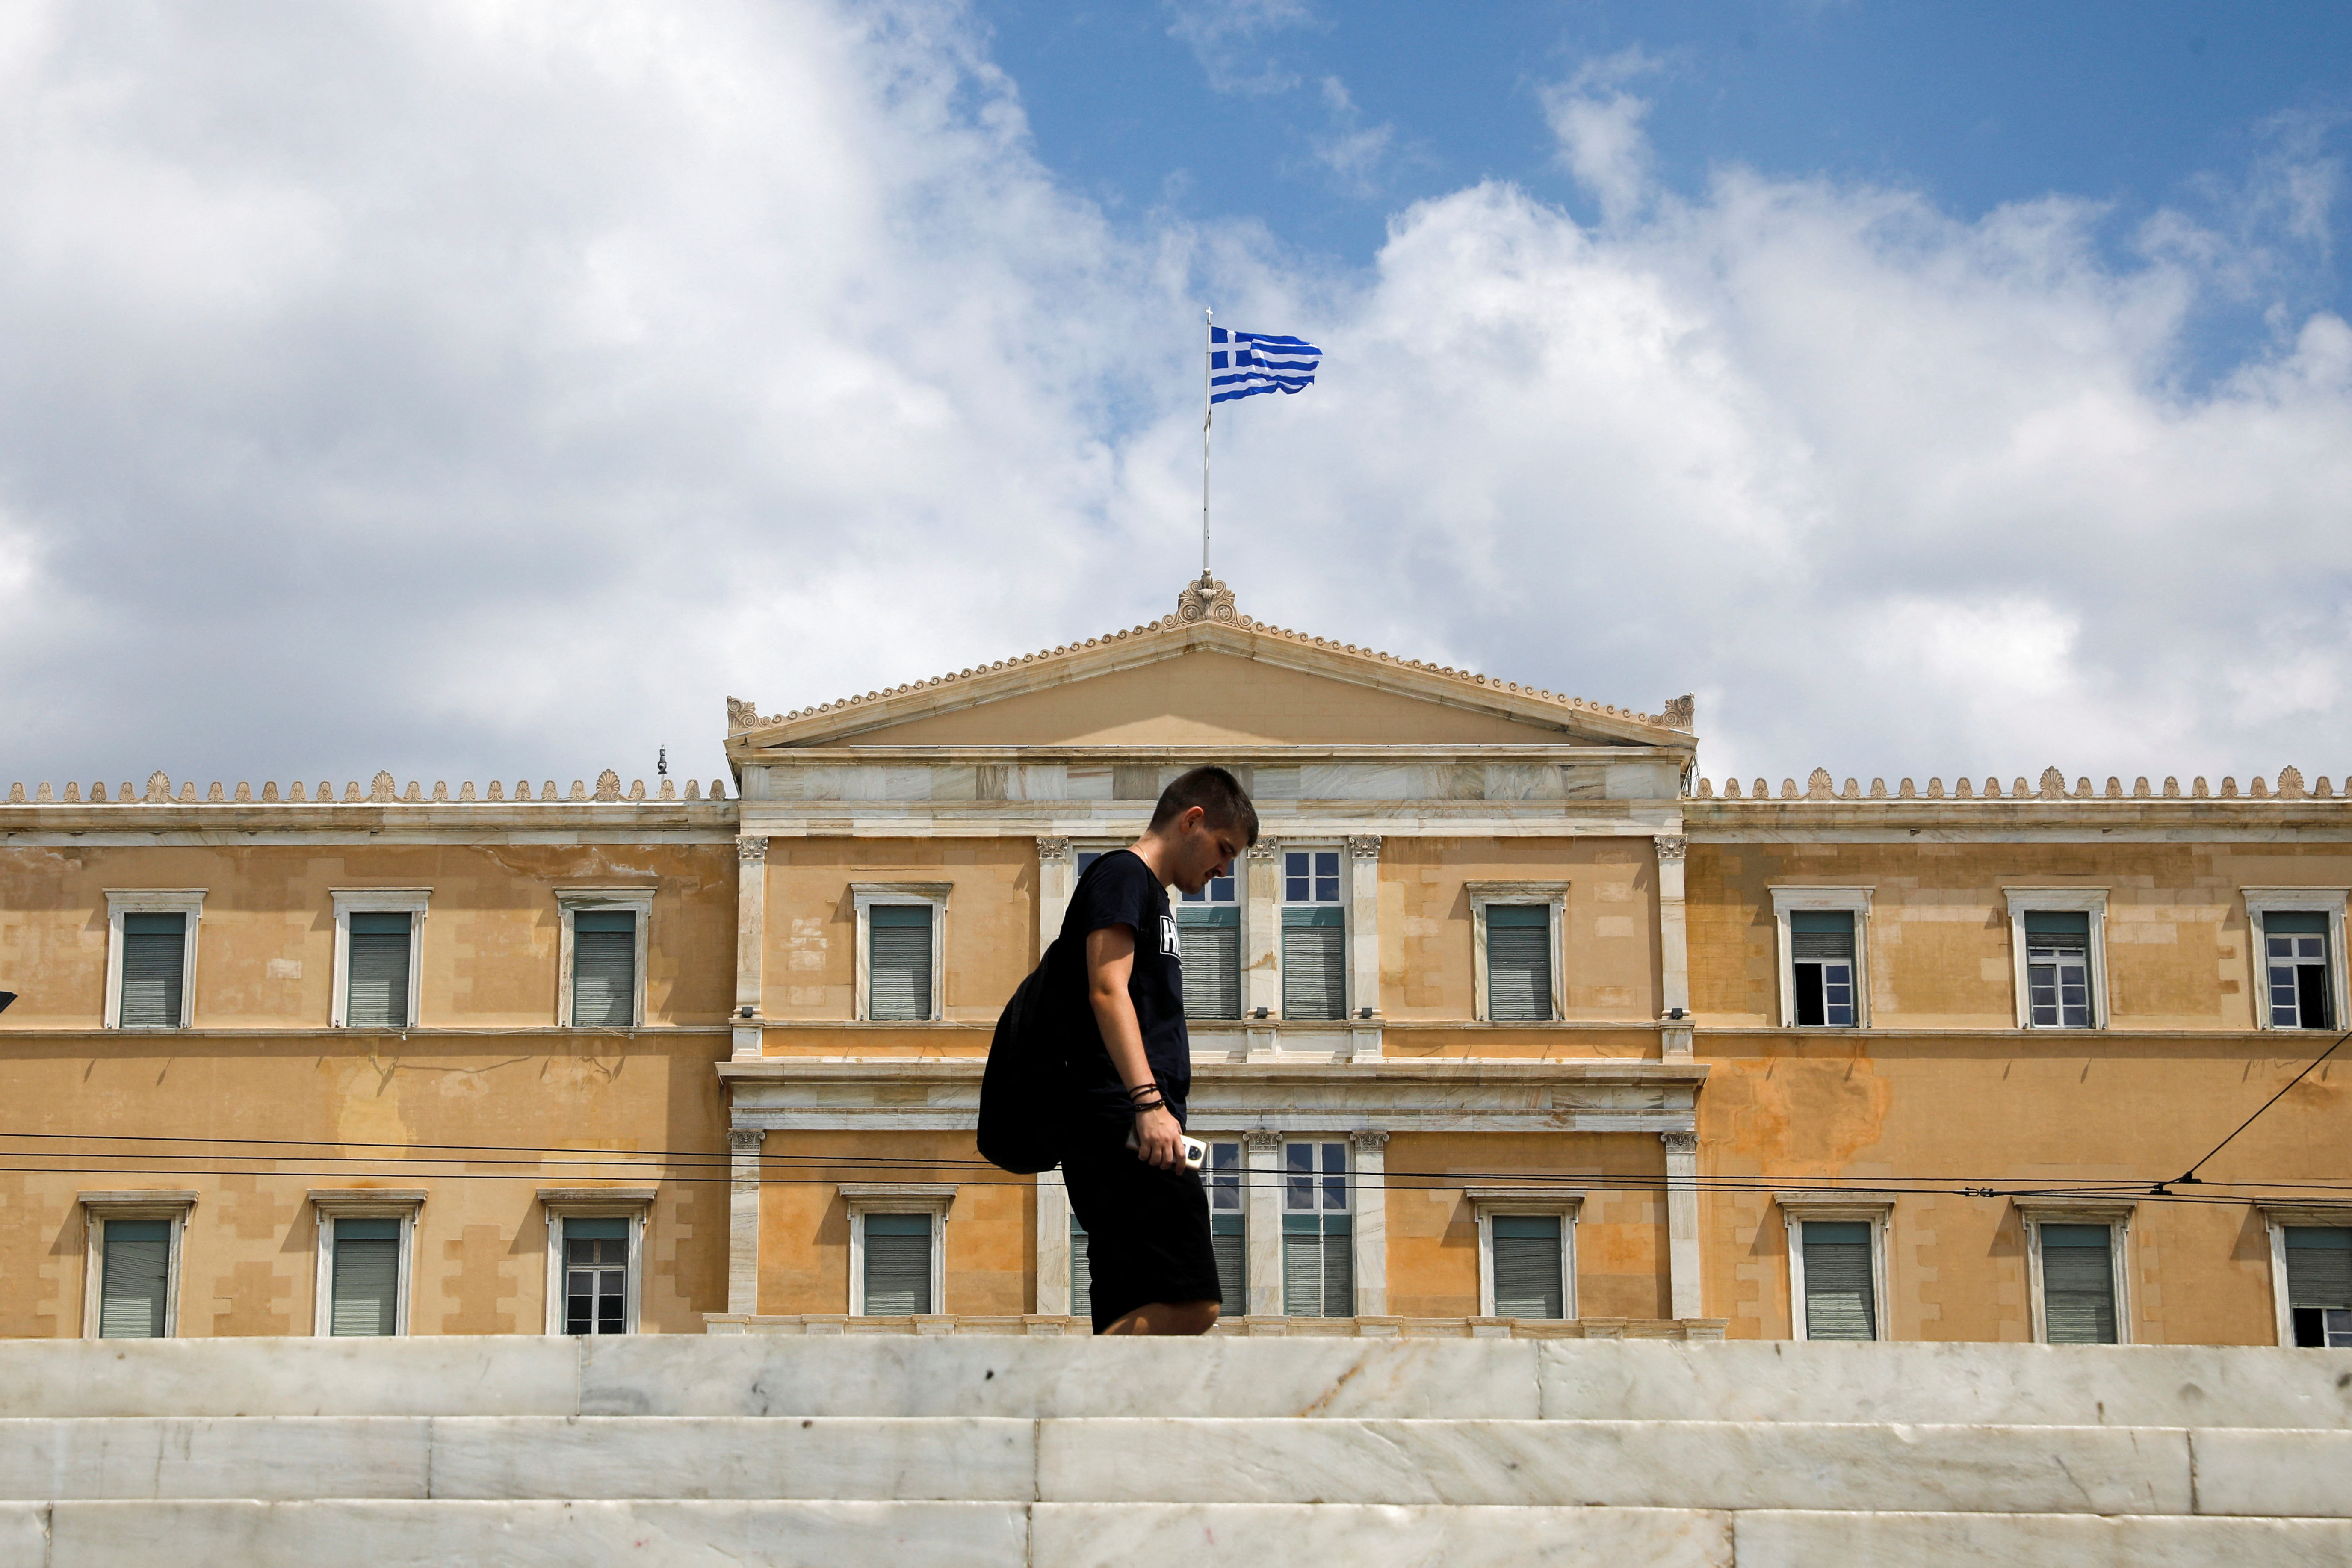 A man makes his way in front of the Greek parliament building in Athens